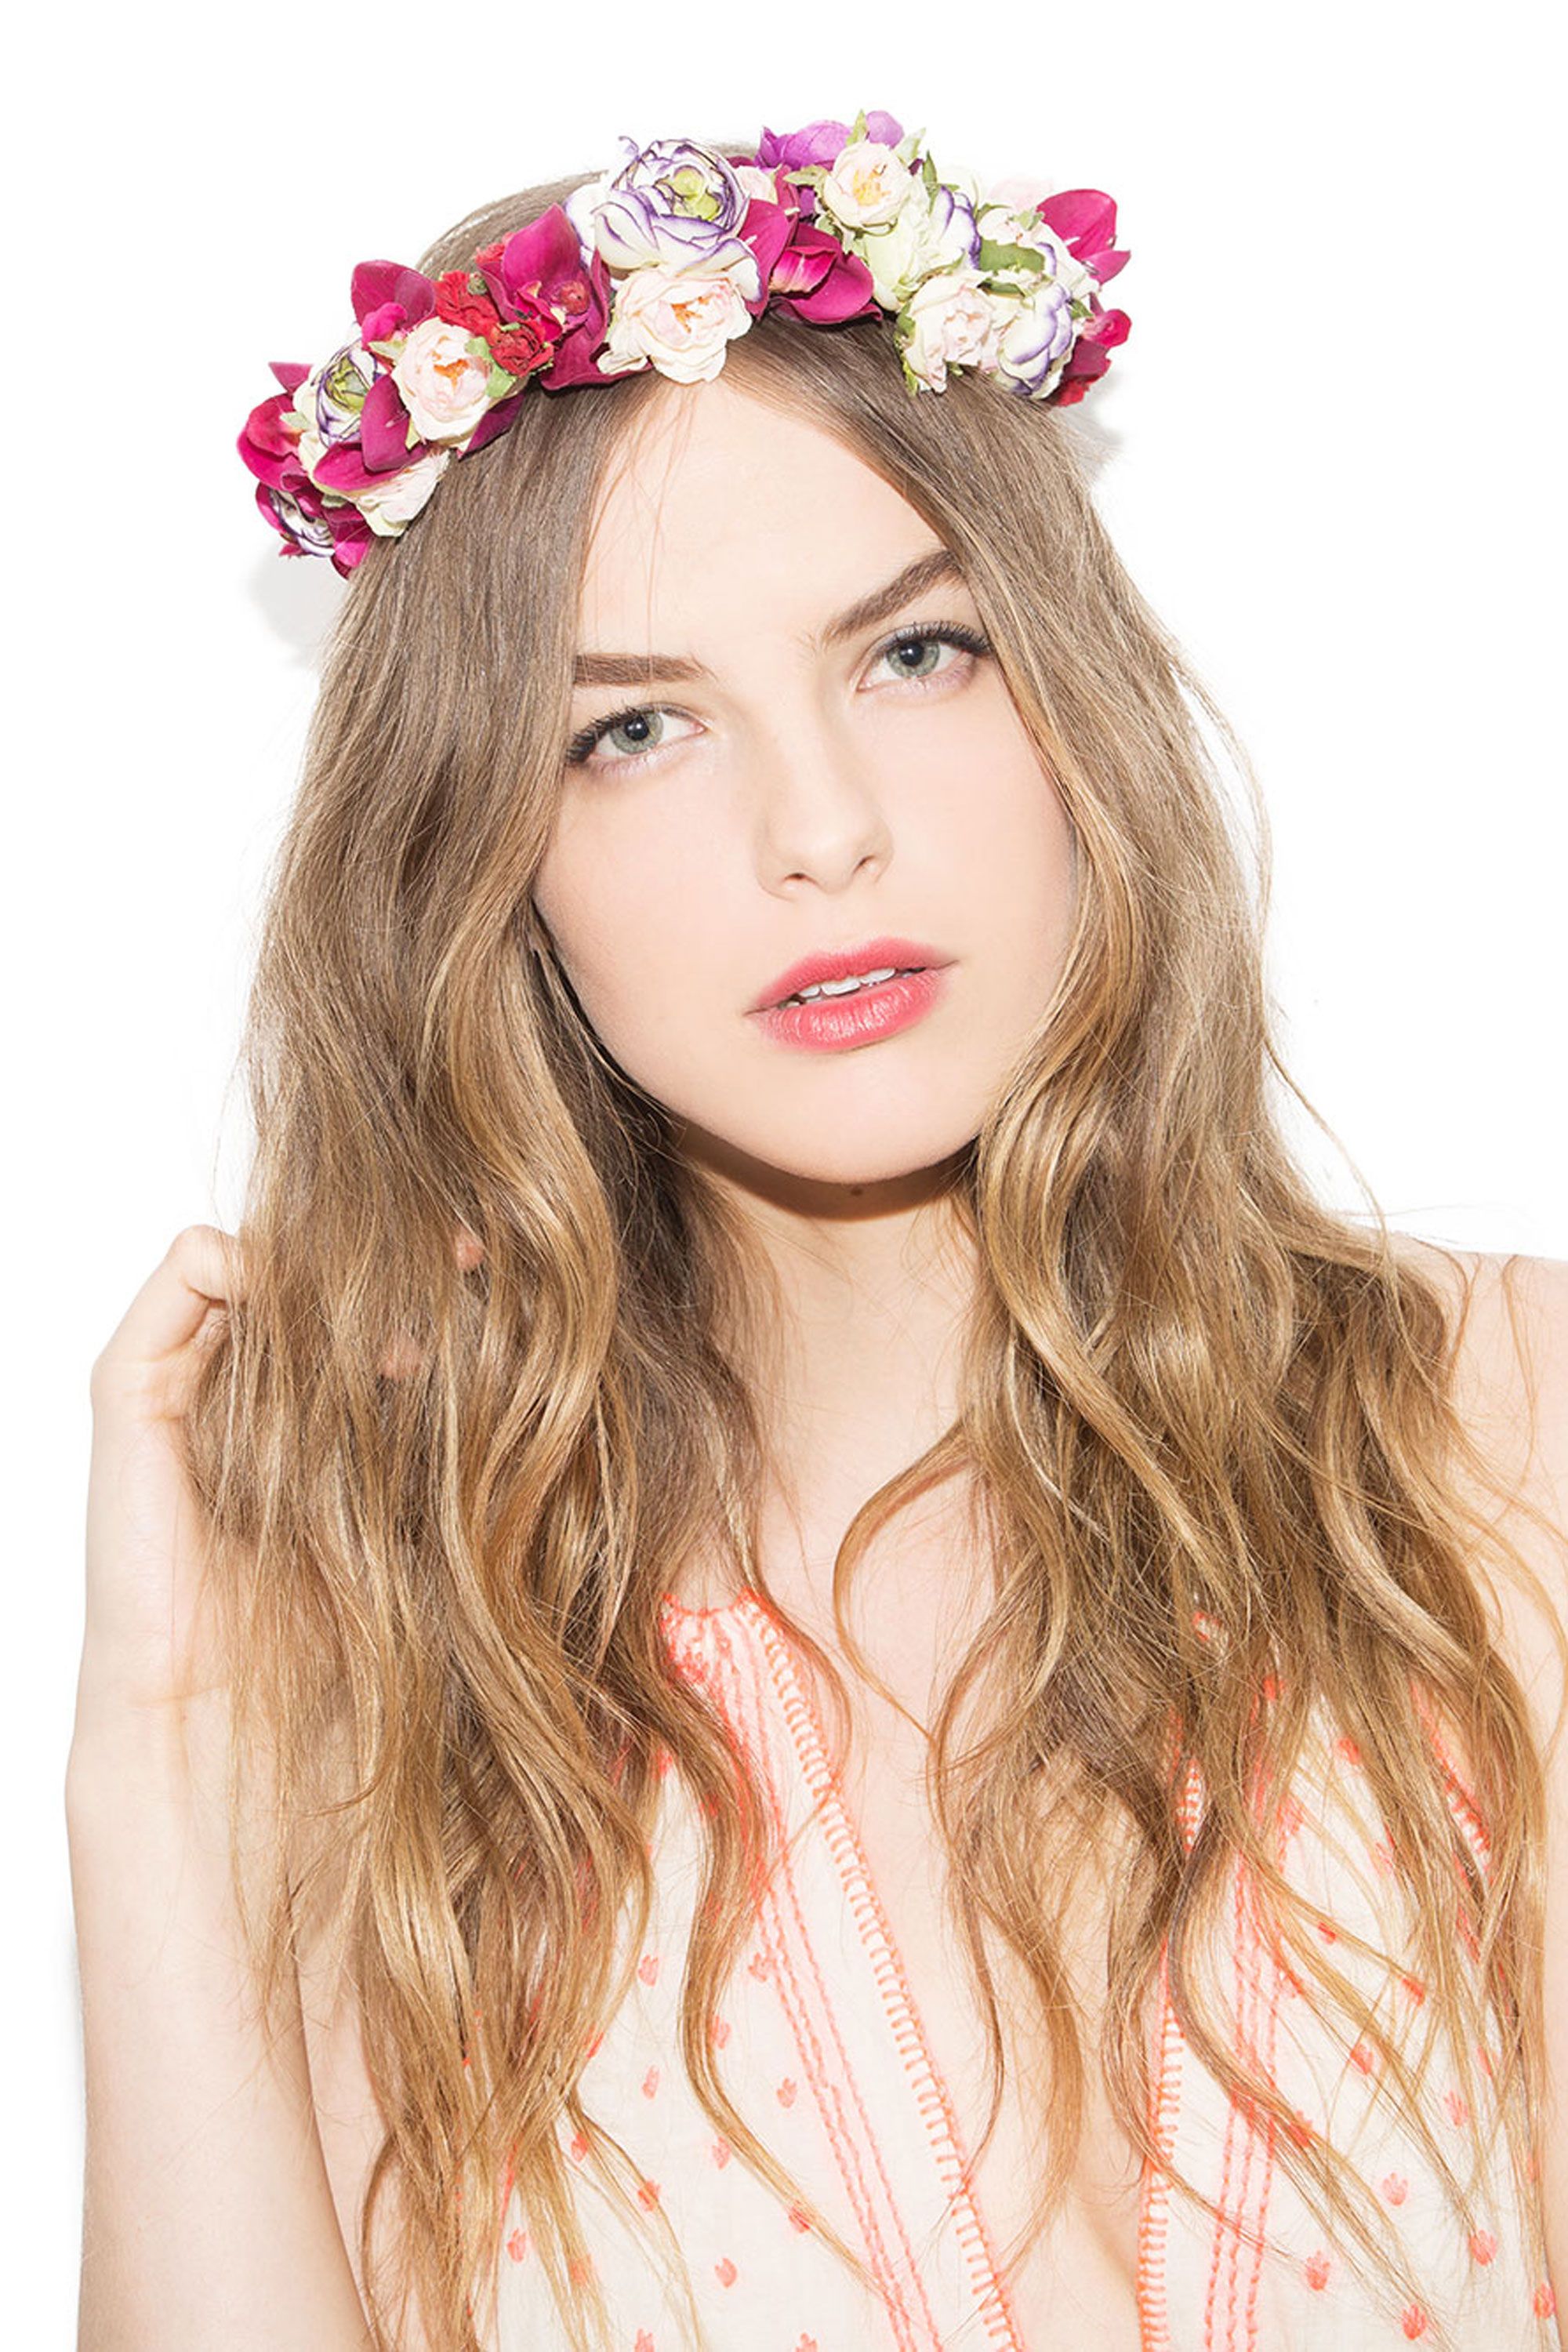 20 Gorgeous Flower Crowns Your Pinterest Board Needs Now